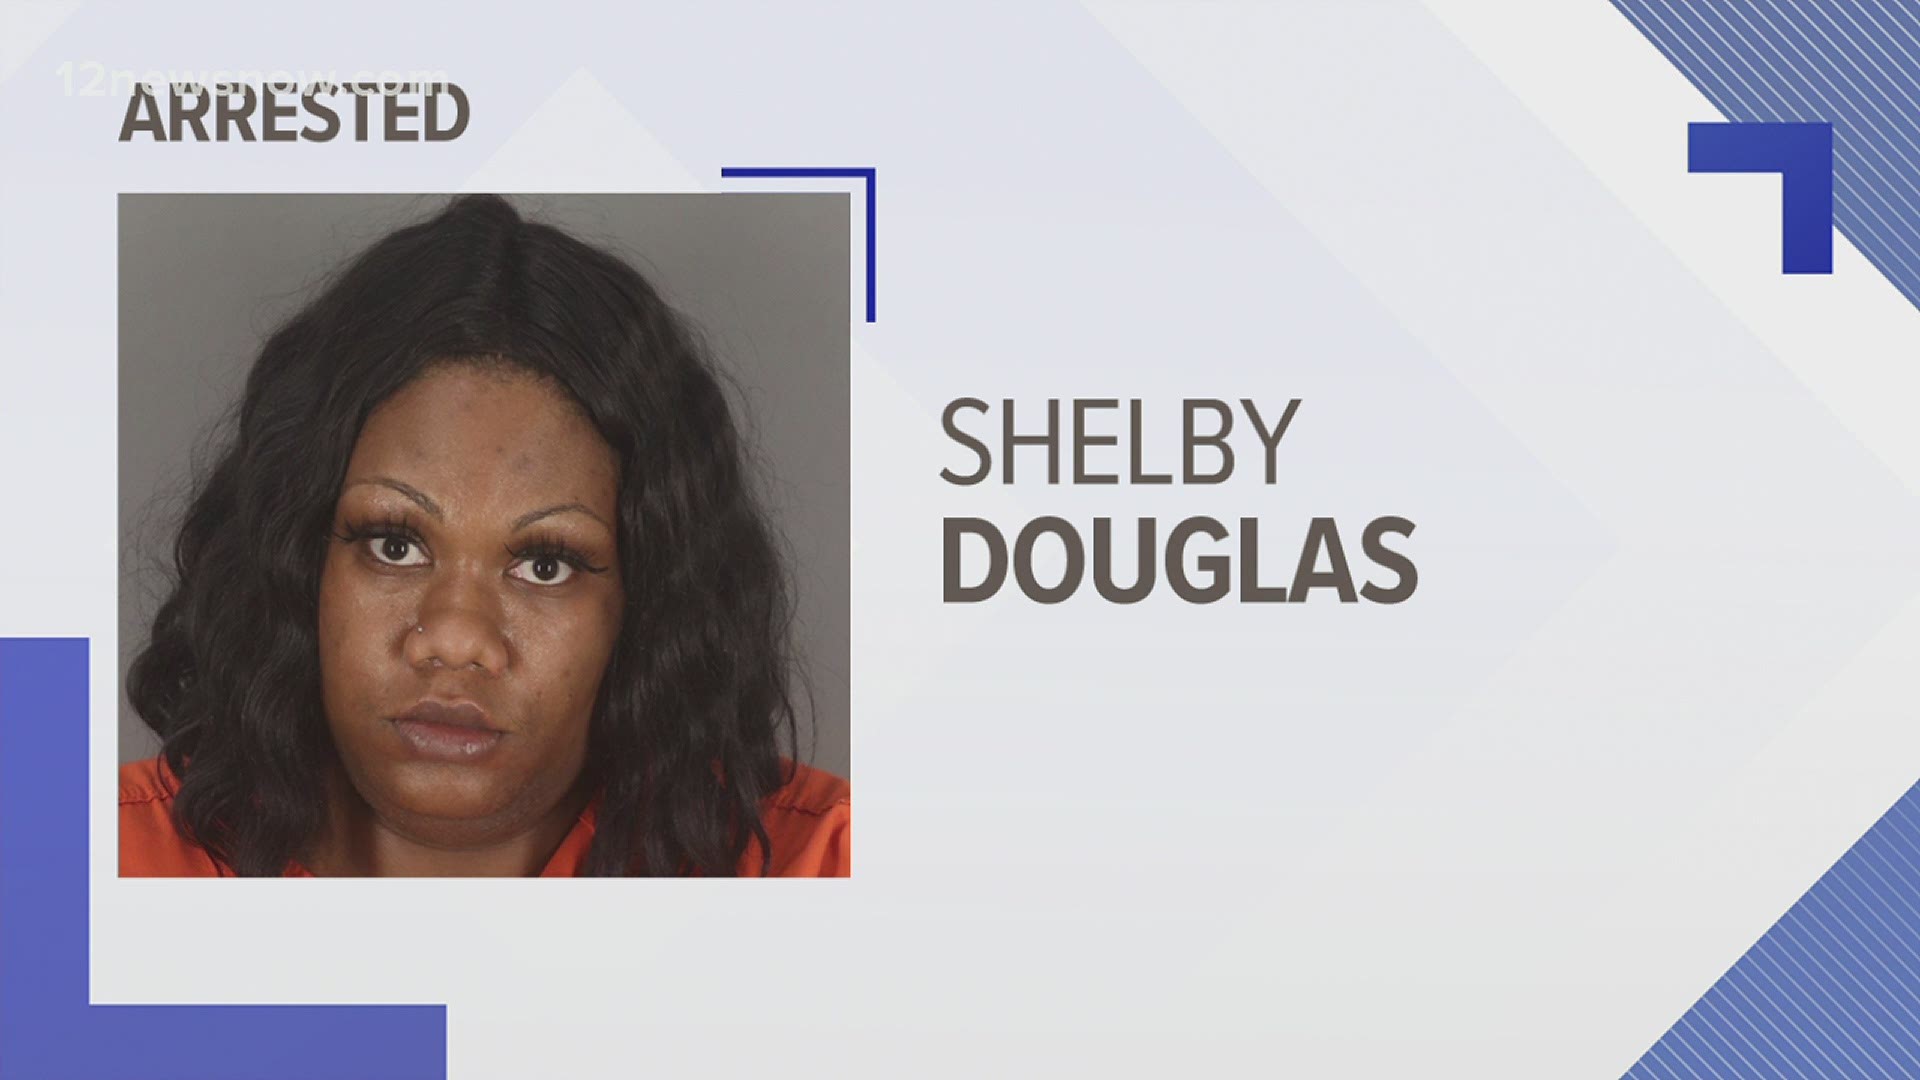 A Beaumont woman is in jail in connection with a fatal hit-and-run that killed a 70-year-old pedestrian early Sunday morning.